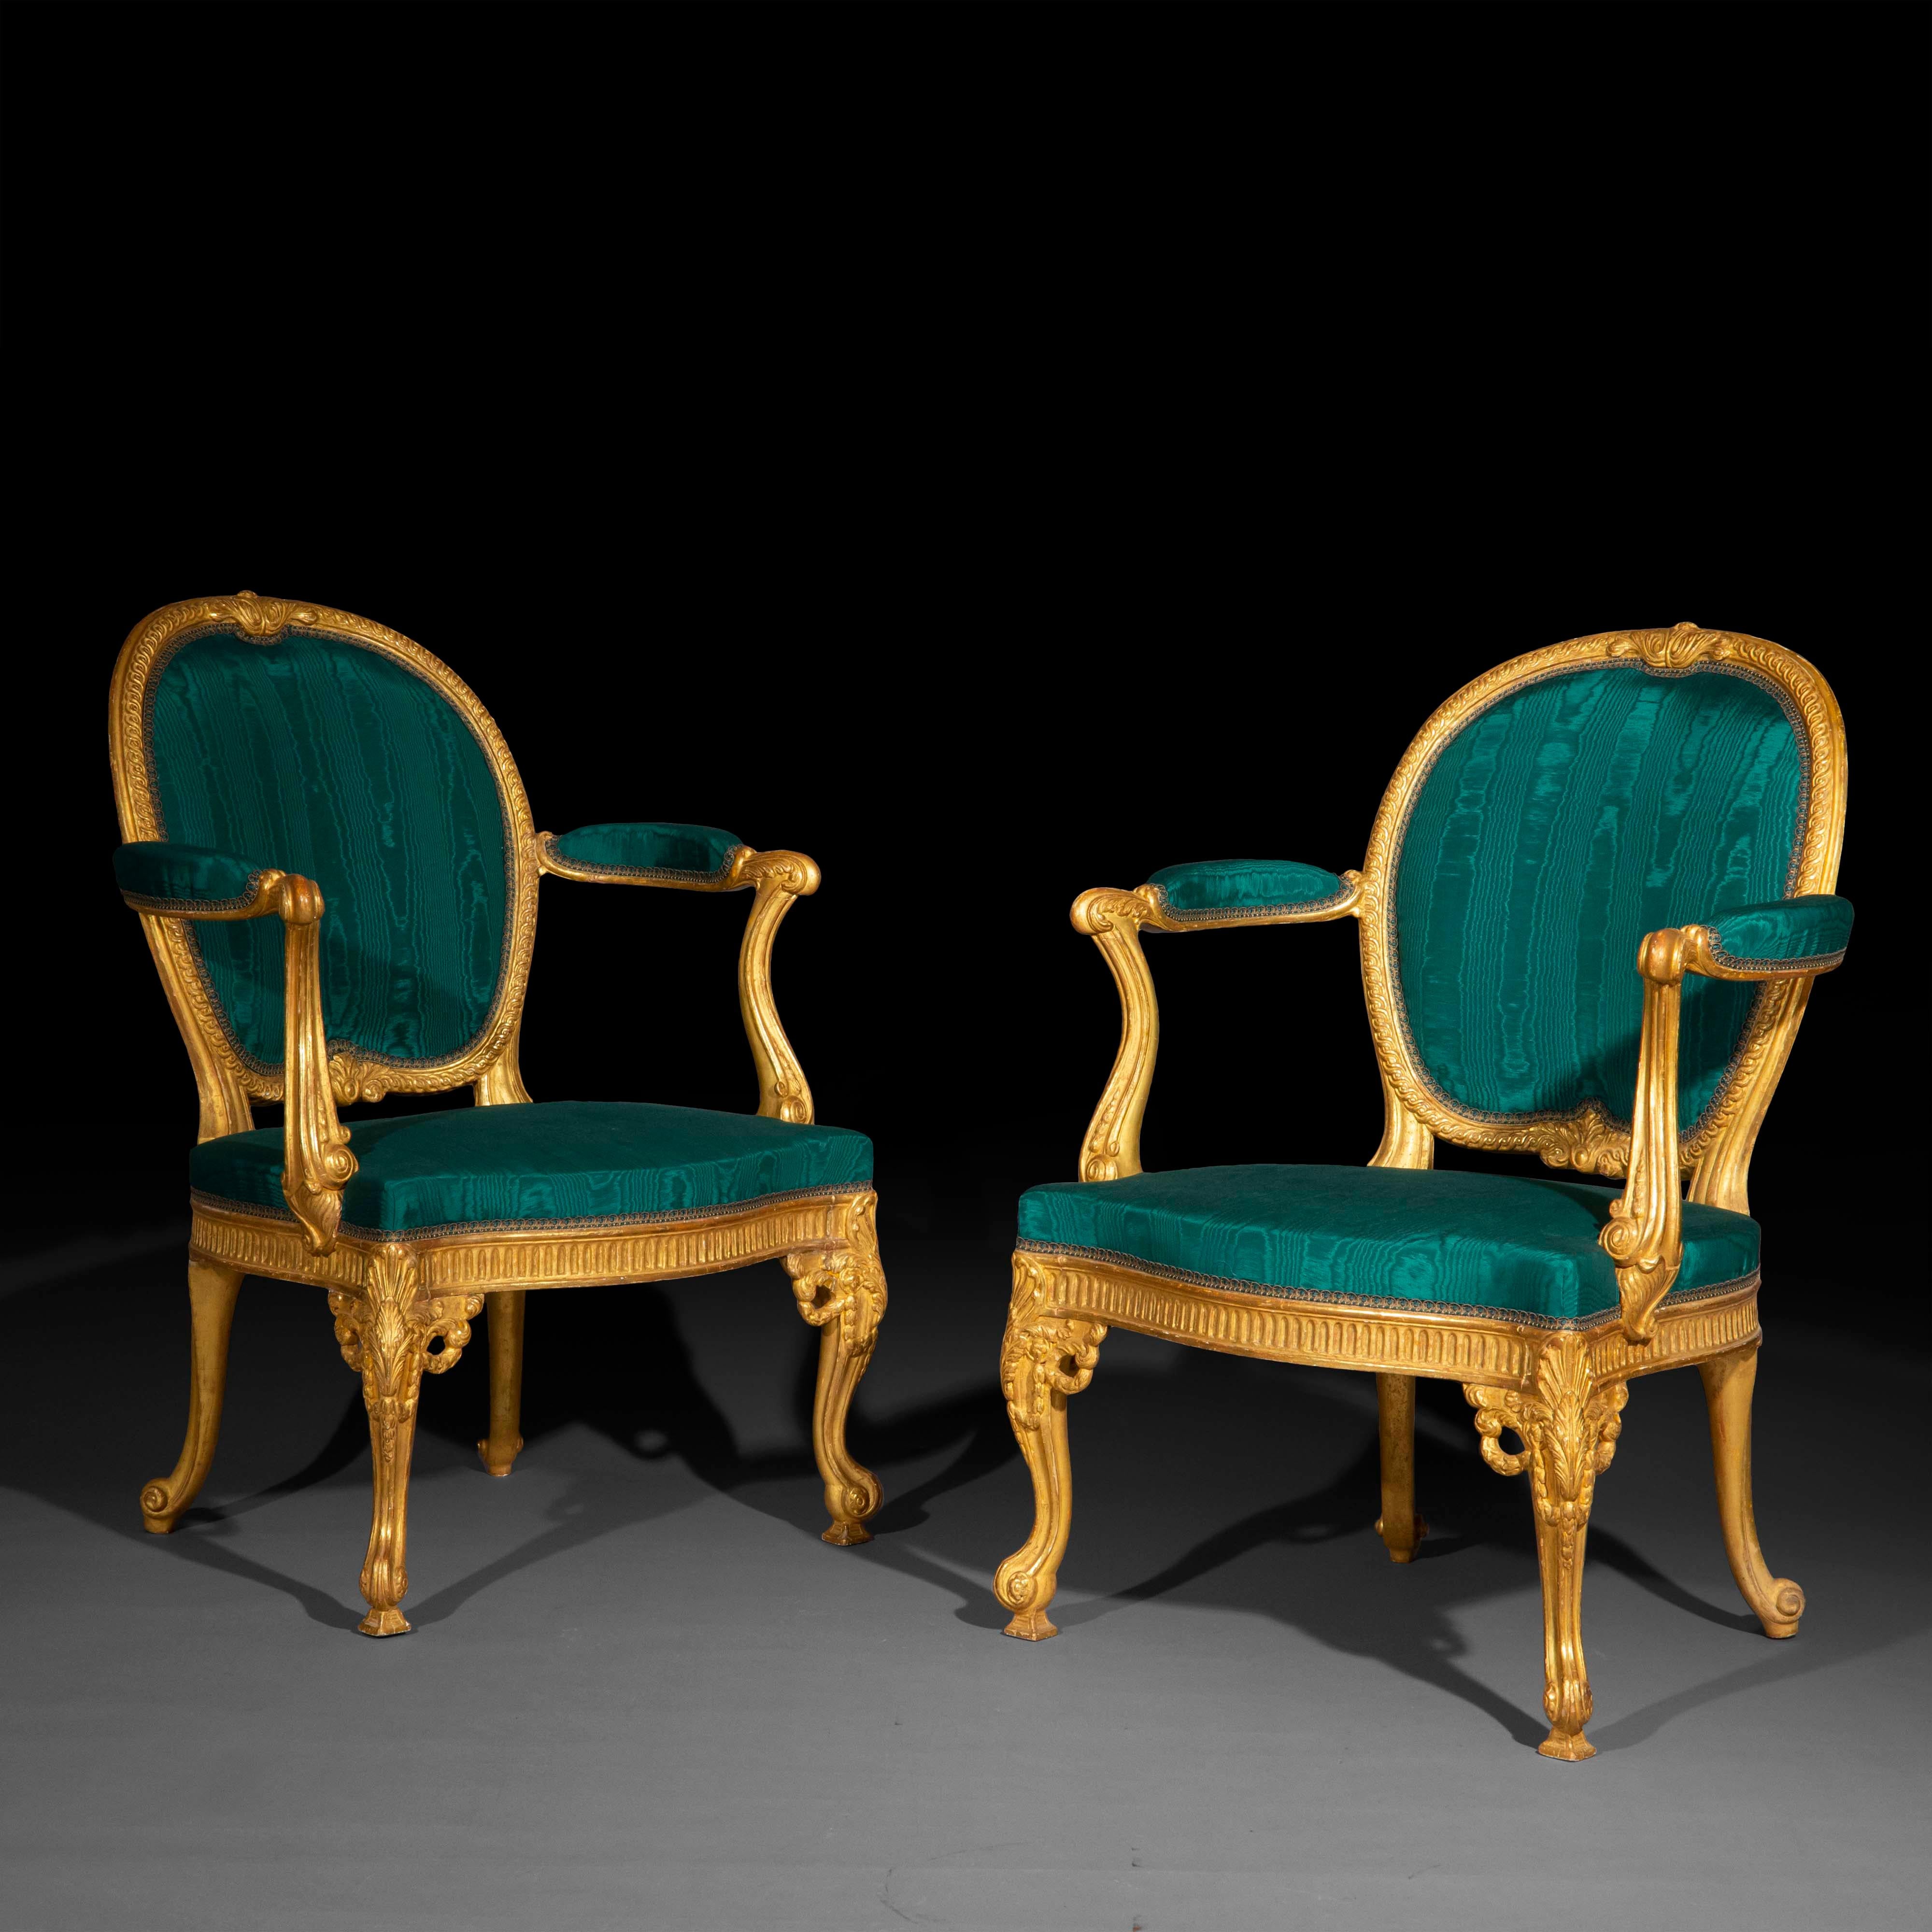 Neoclassical Gilt Armchair after Thomas Chippendale - Two Available For Sale